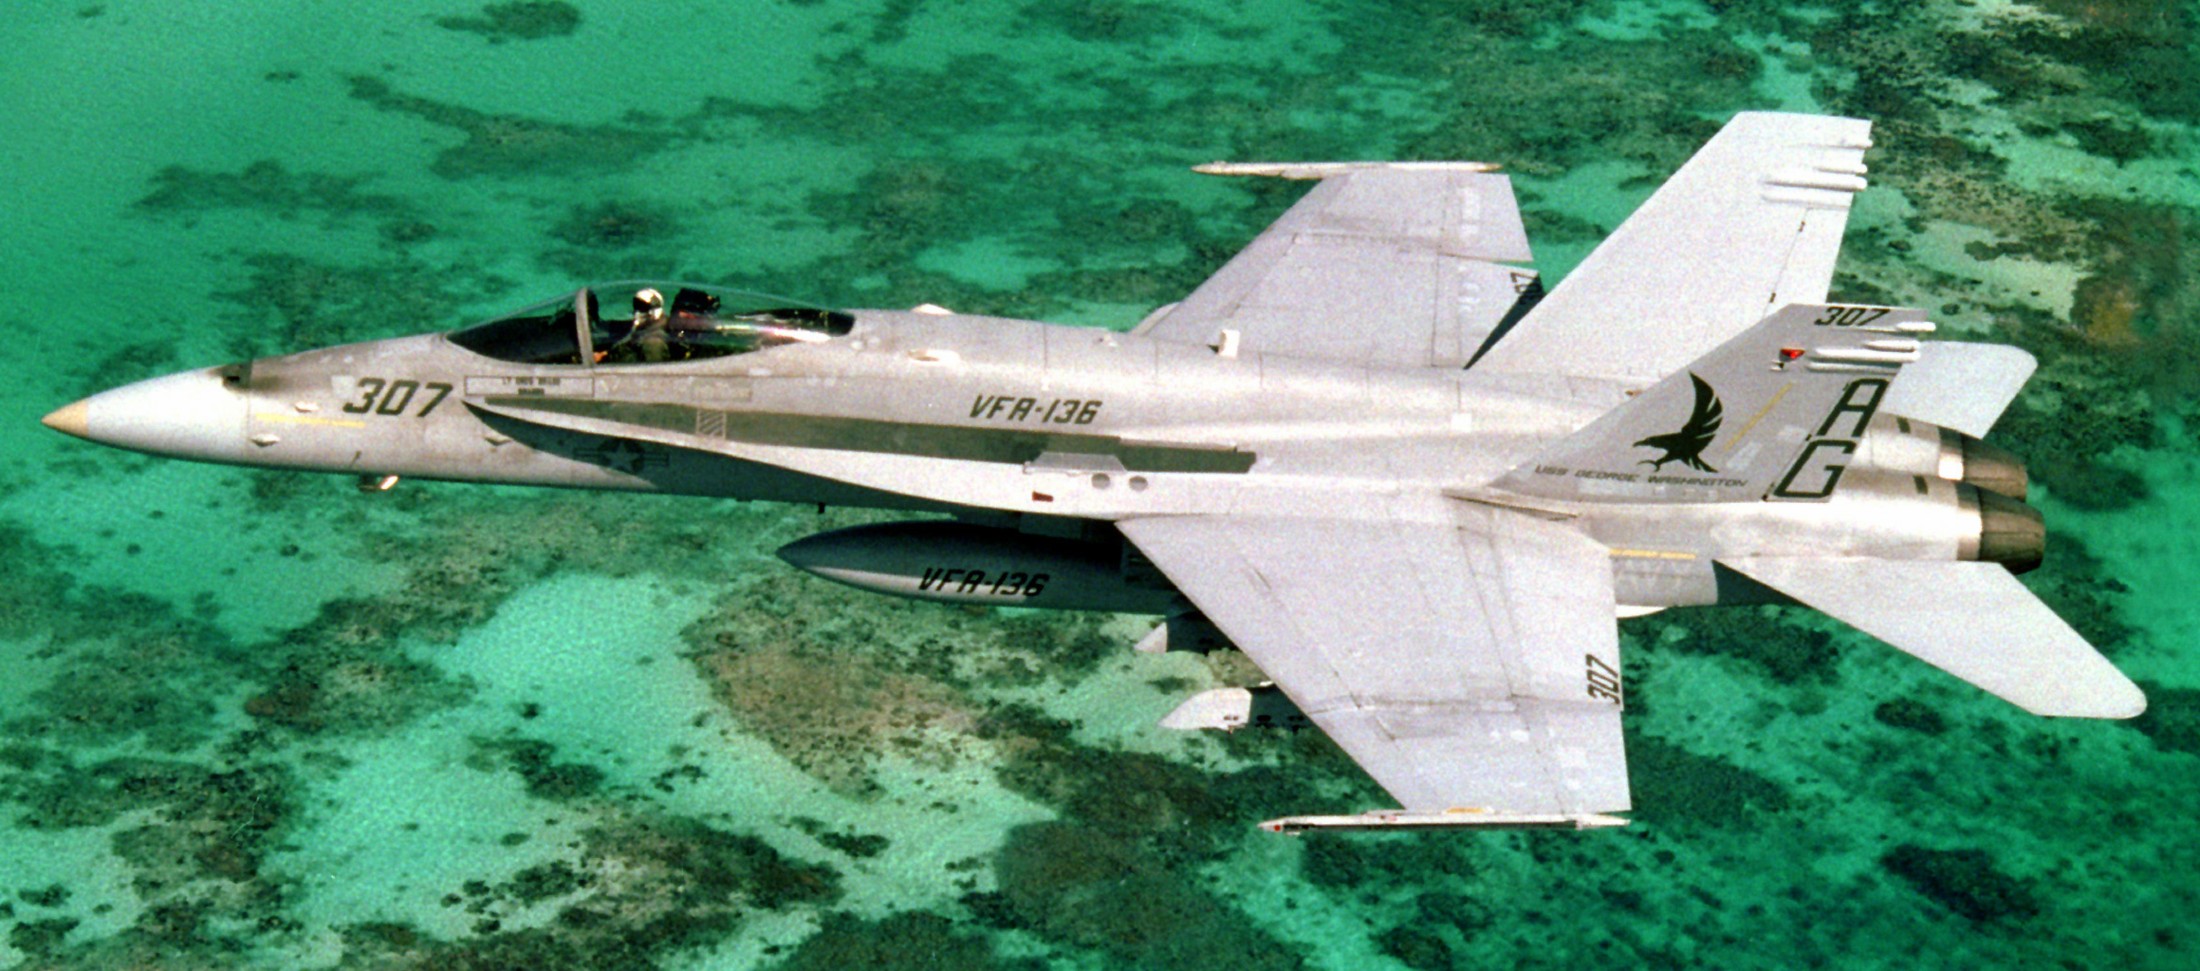 vfa-136 knighthawks strike fighter squadron f/a-18c hornet 1992 71 cvw-7 naval station roosevelt roads puerto rico